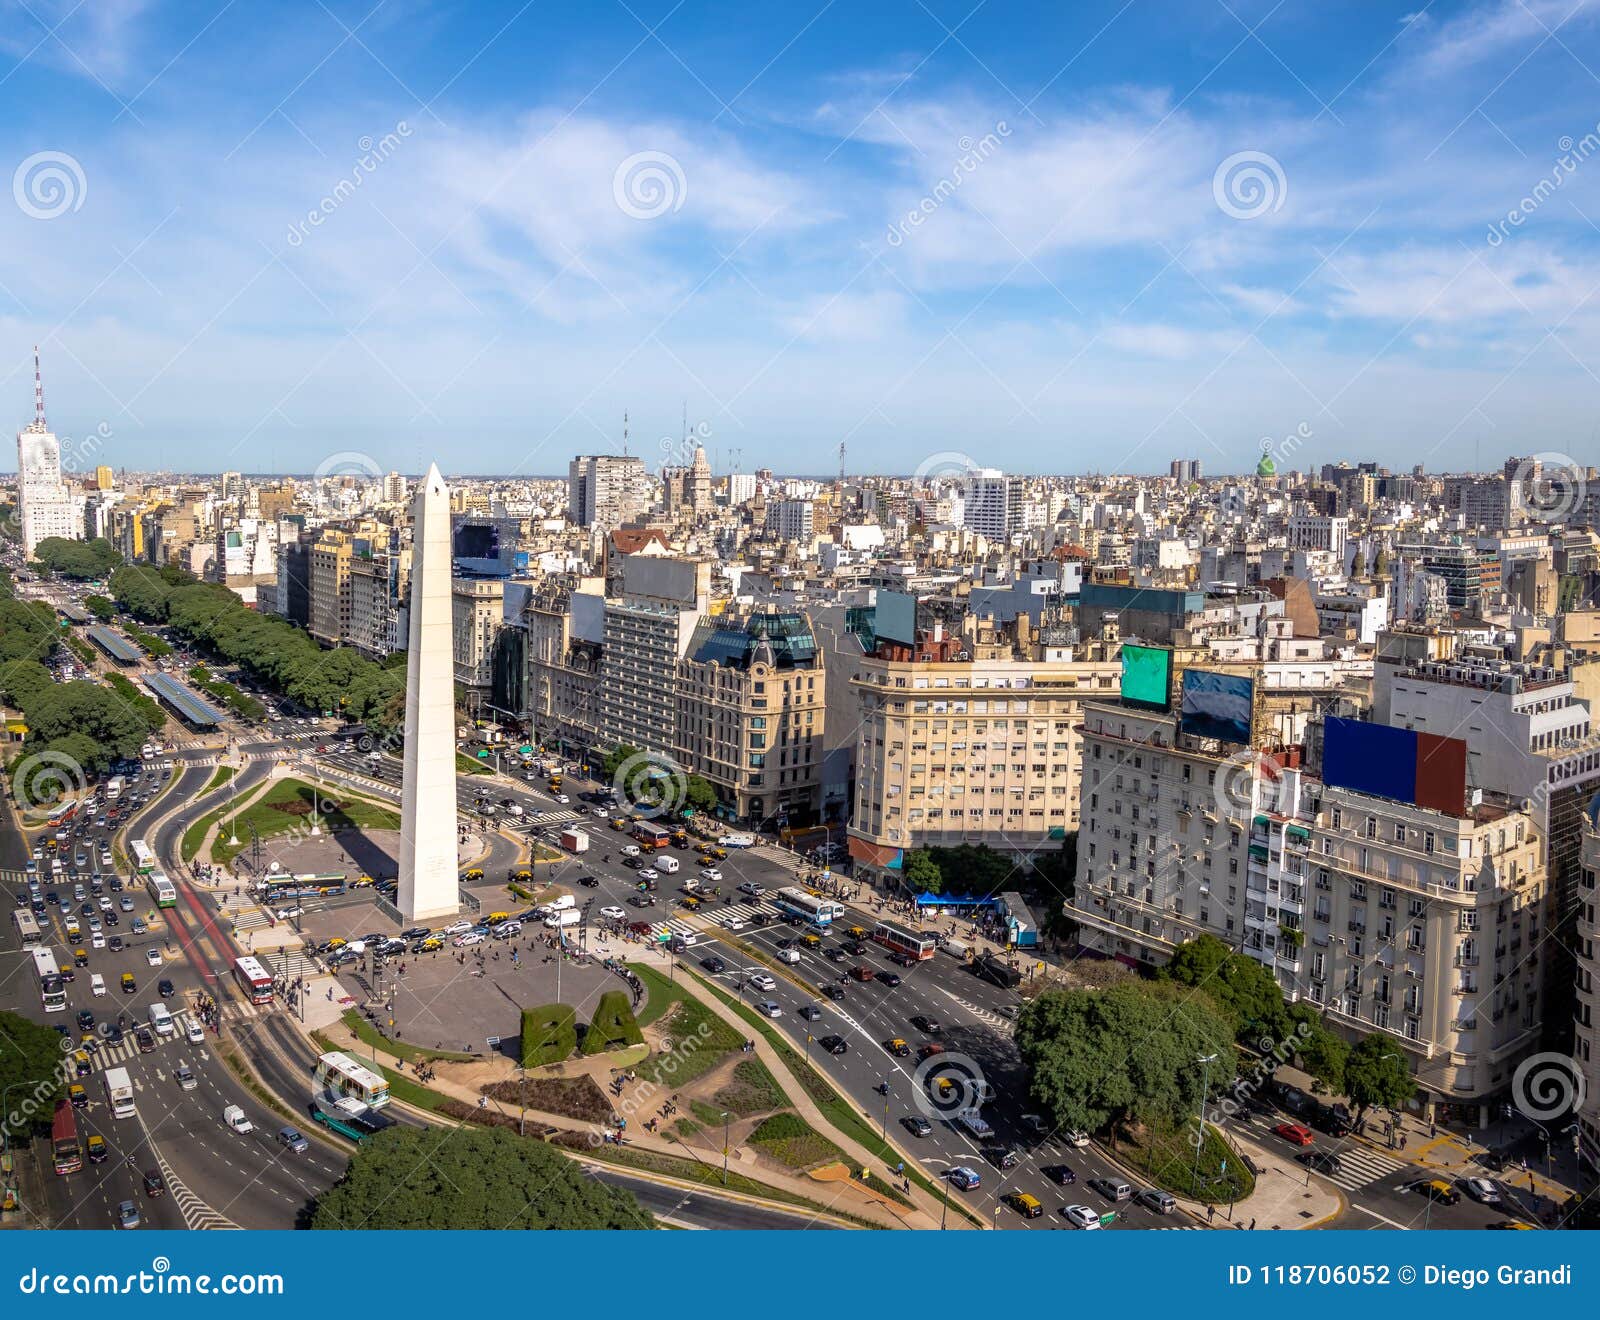 aerial view of buenos aires city with obelisk and 9 de julio avenue - buenos aires, argentina